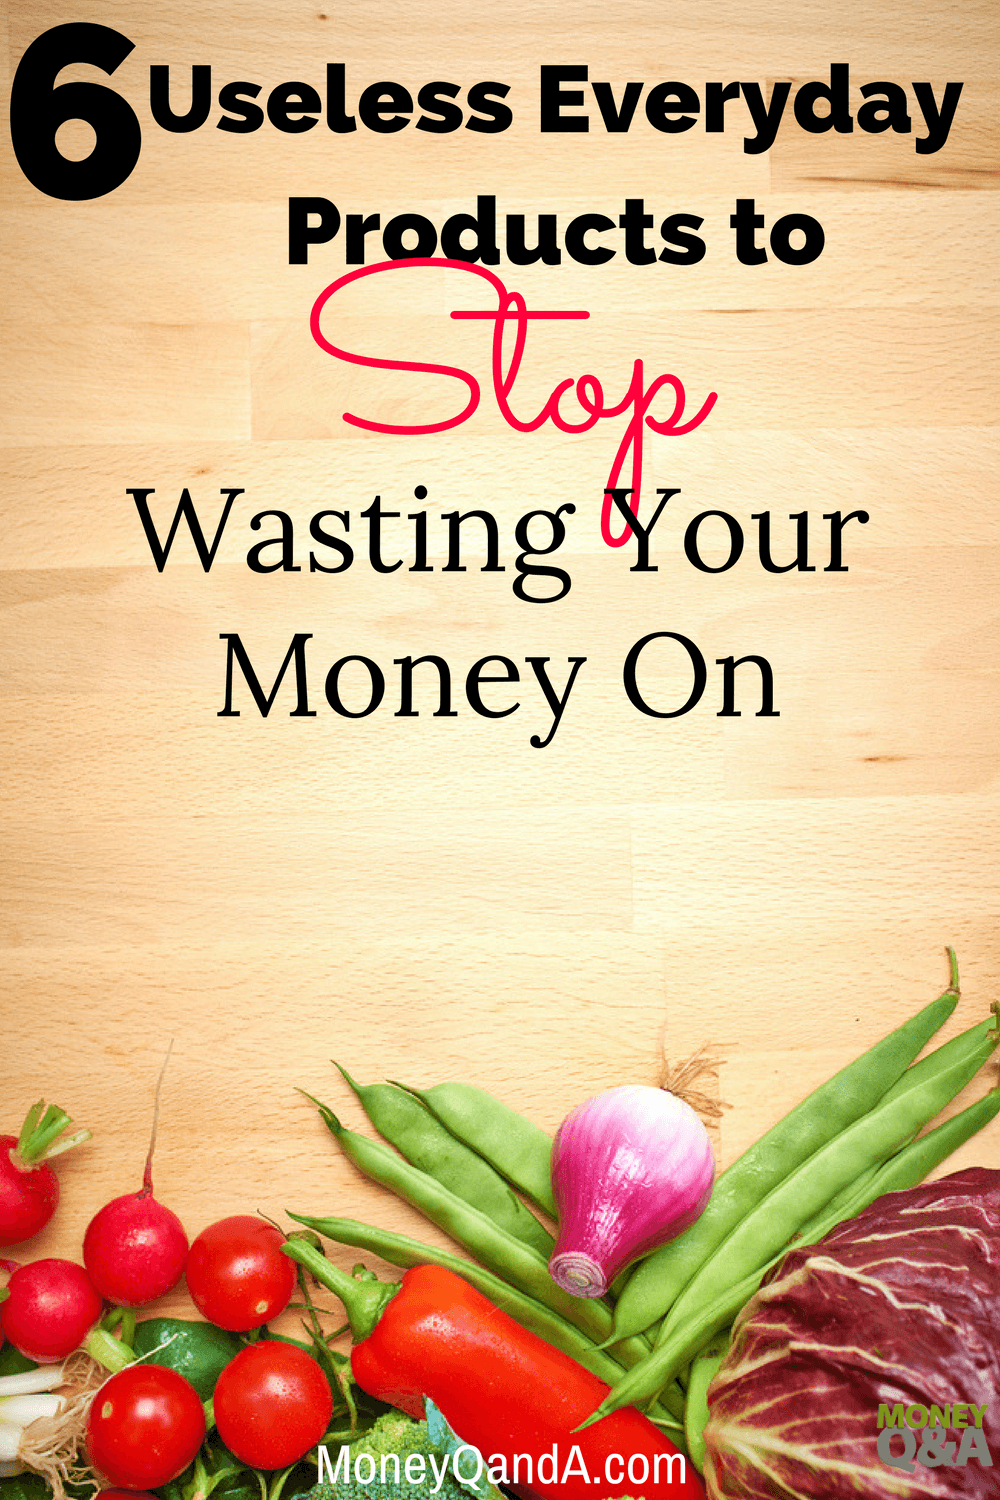 Useless Everyday Products to Stop Wasting Money On